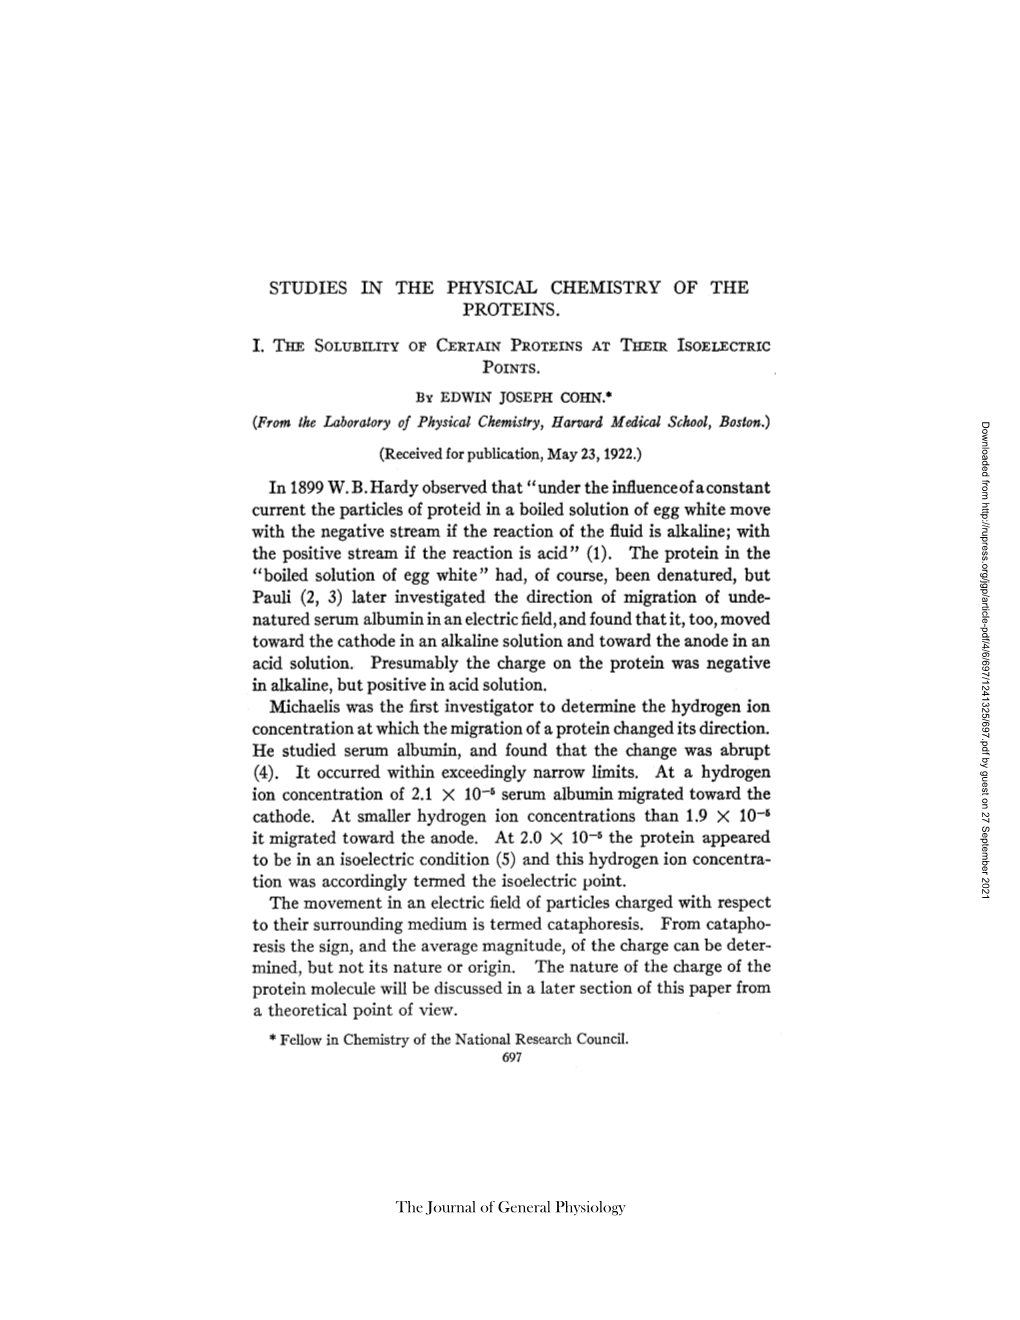 Studies in the Physical Chemistry of the Proteins